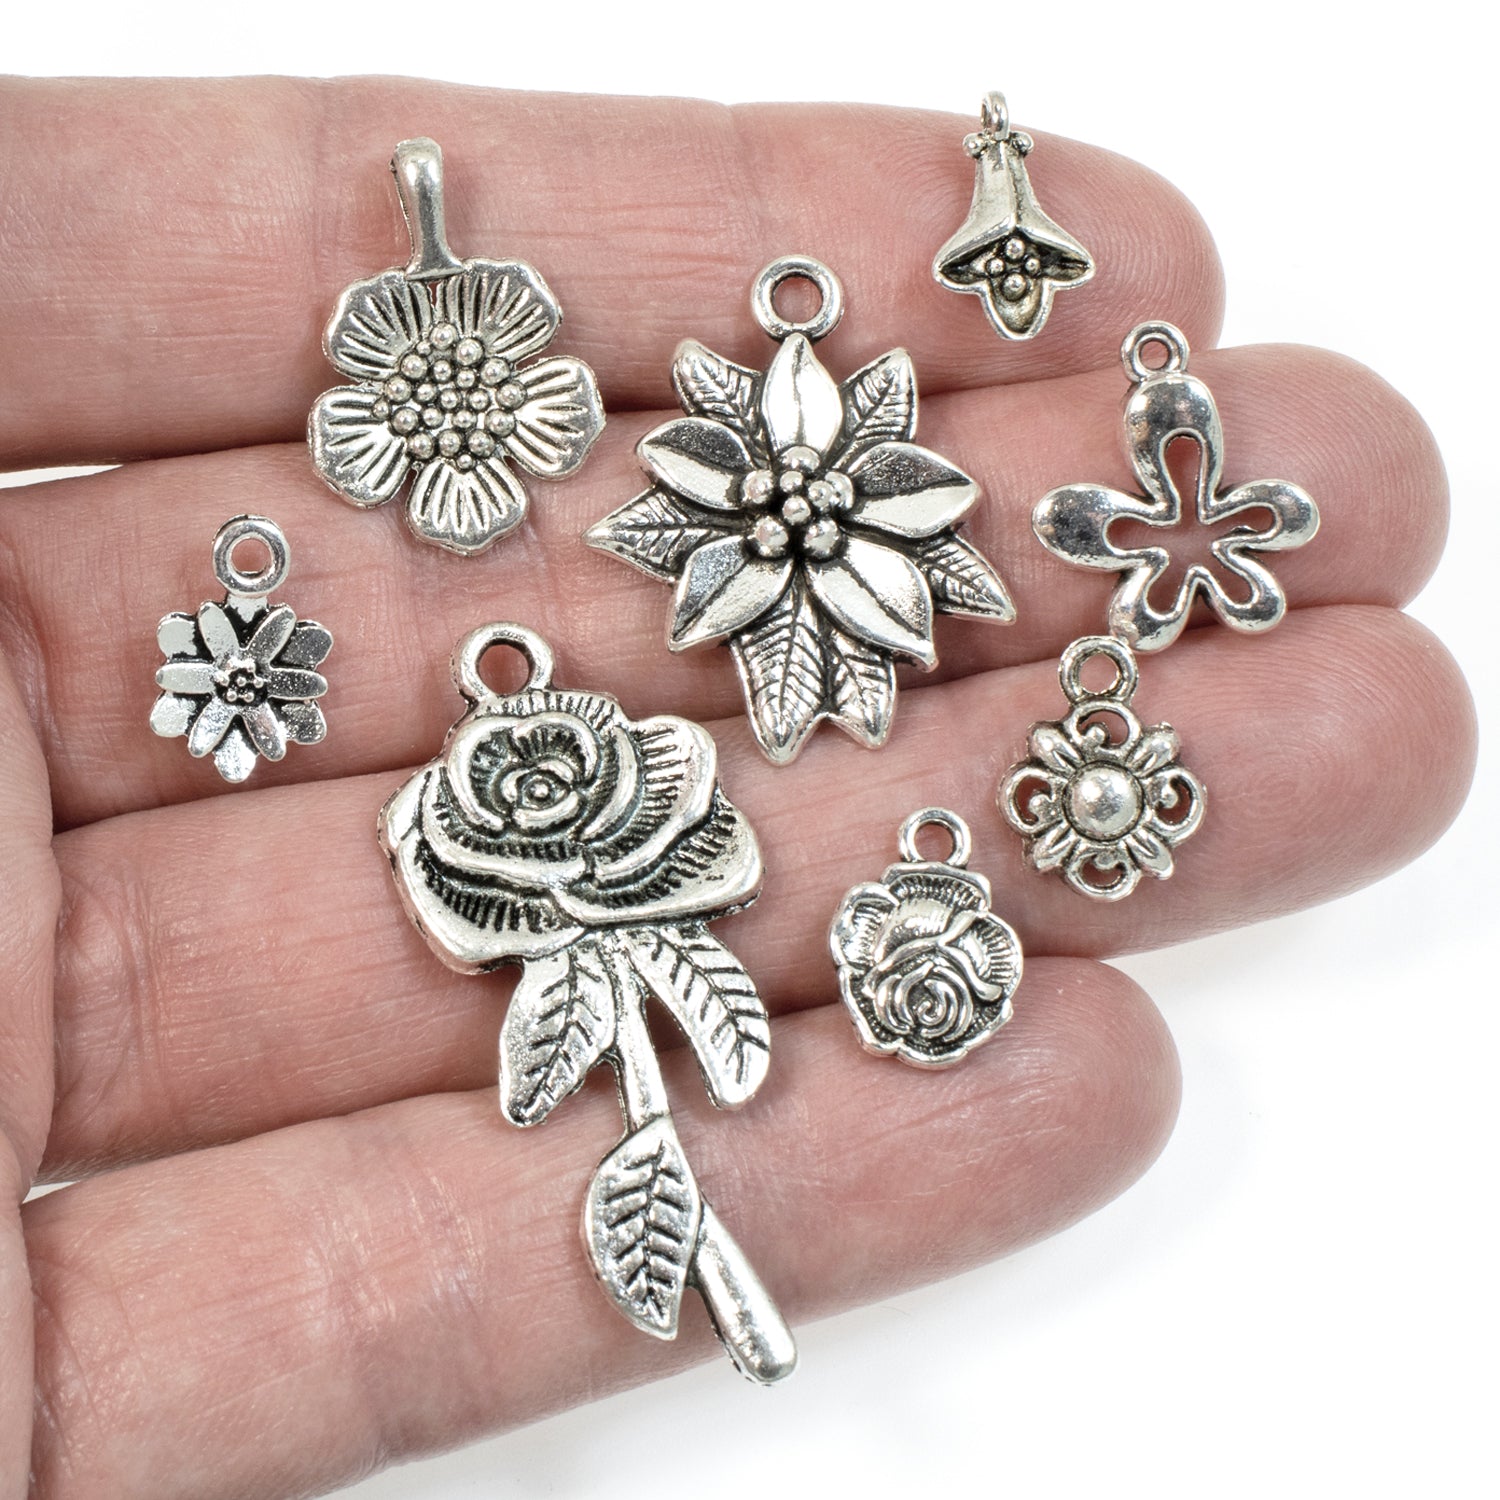 5 Pack Silver Long Stem Rose Pendants, Large Metal Flower Charms for DIY  Jewelry Making and Keychain Charms, Bulk Rose Charms for Crafts 